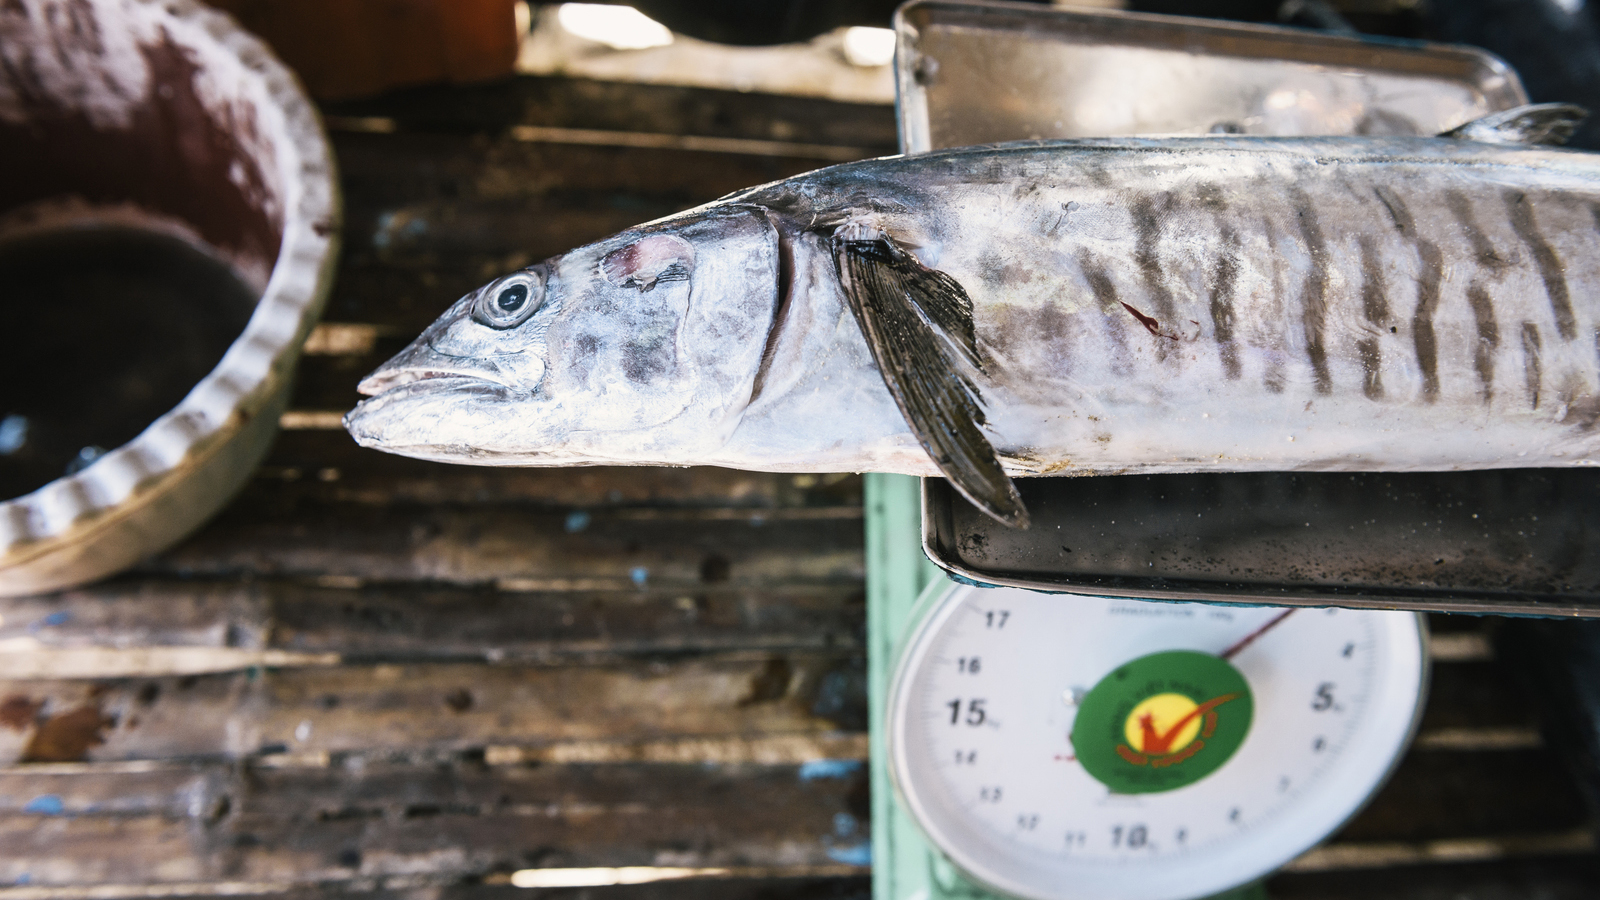 Wahoo fish are prepped to be weighed and measured. With the help of the Nature Conservancy and other partners, fisherman have learned the best practices for fishing sustainably. Photo © Kevin Arnold